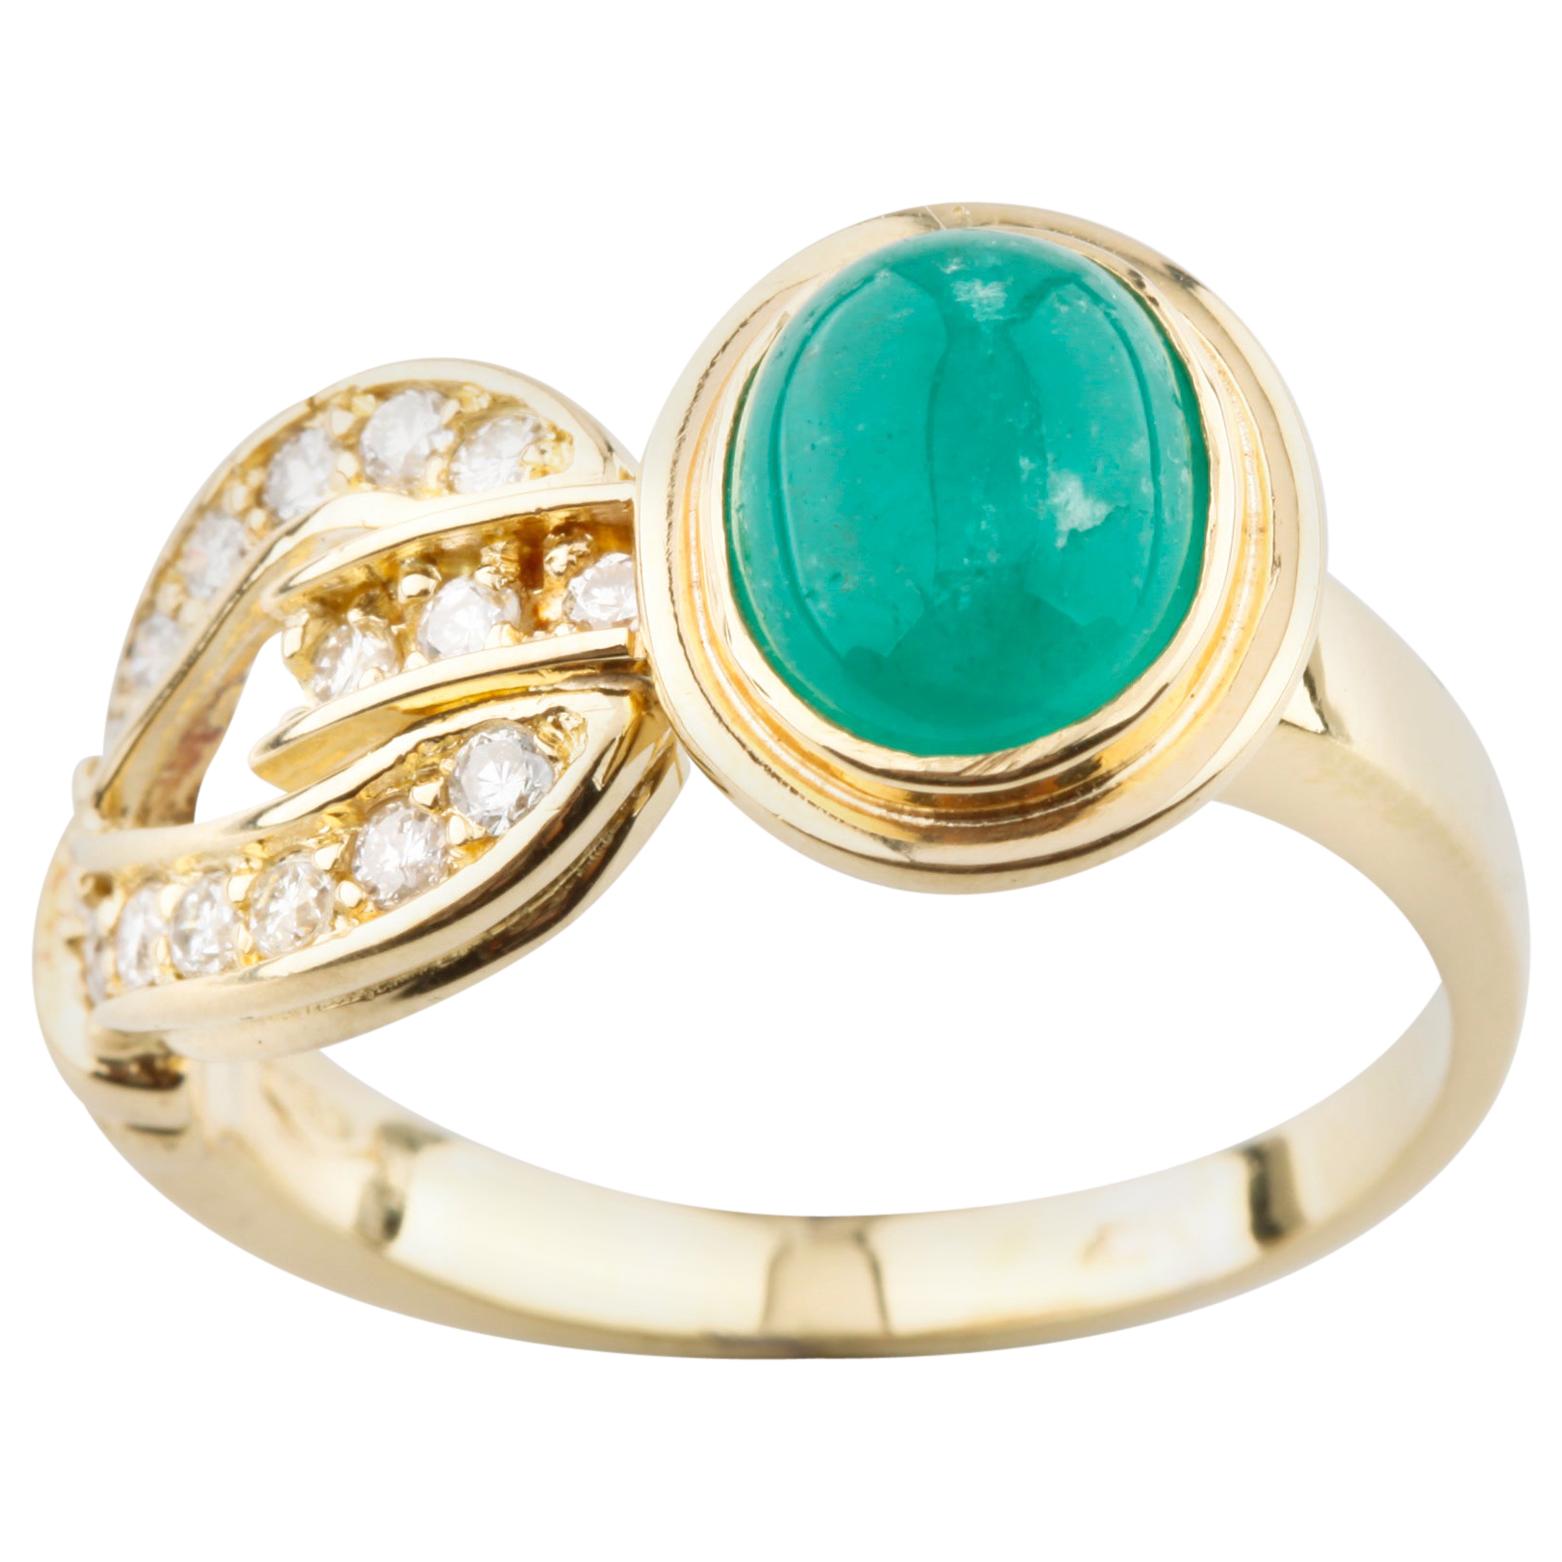 2.00 Carat Emerald Cabochon Ring Diamond Accents in Yellow Gold